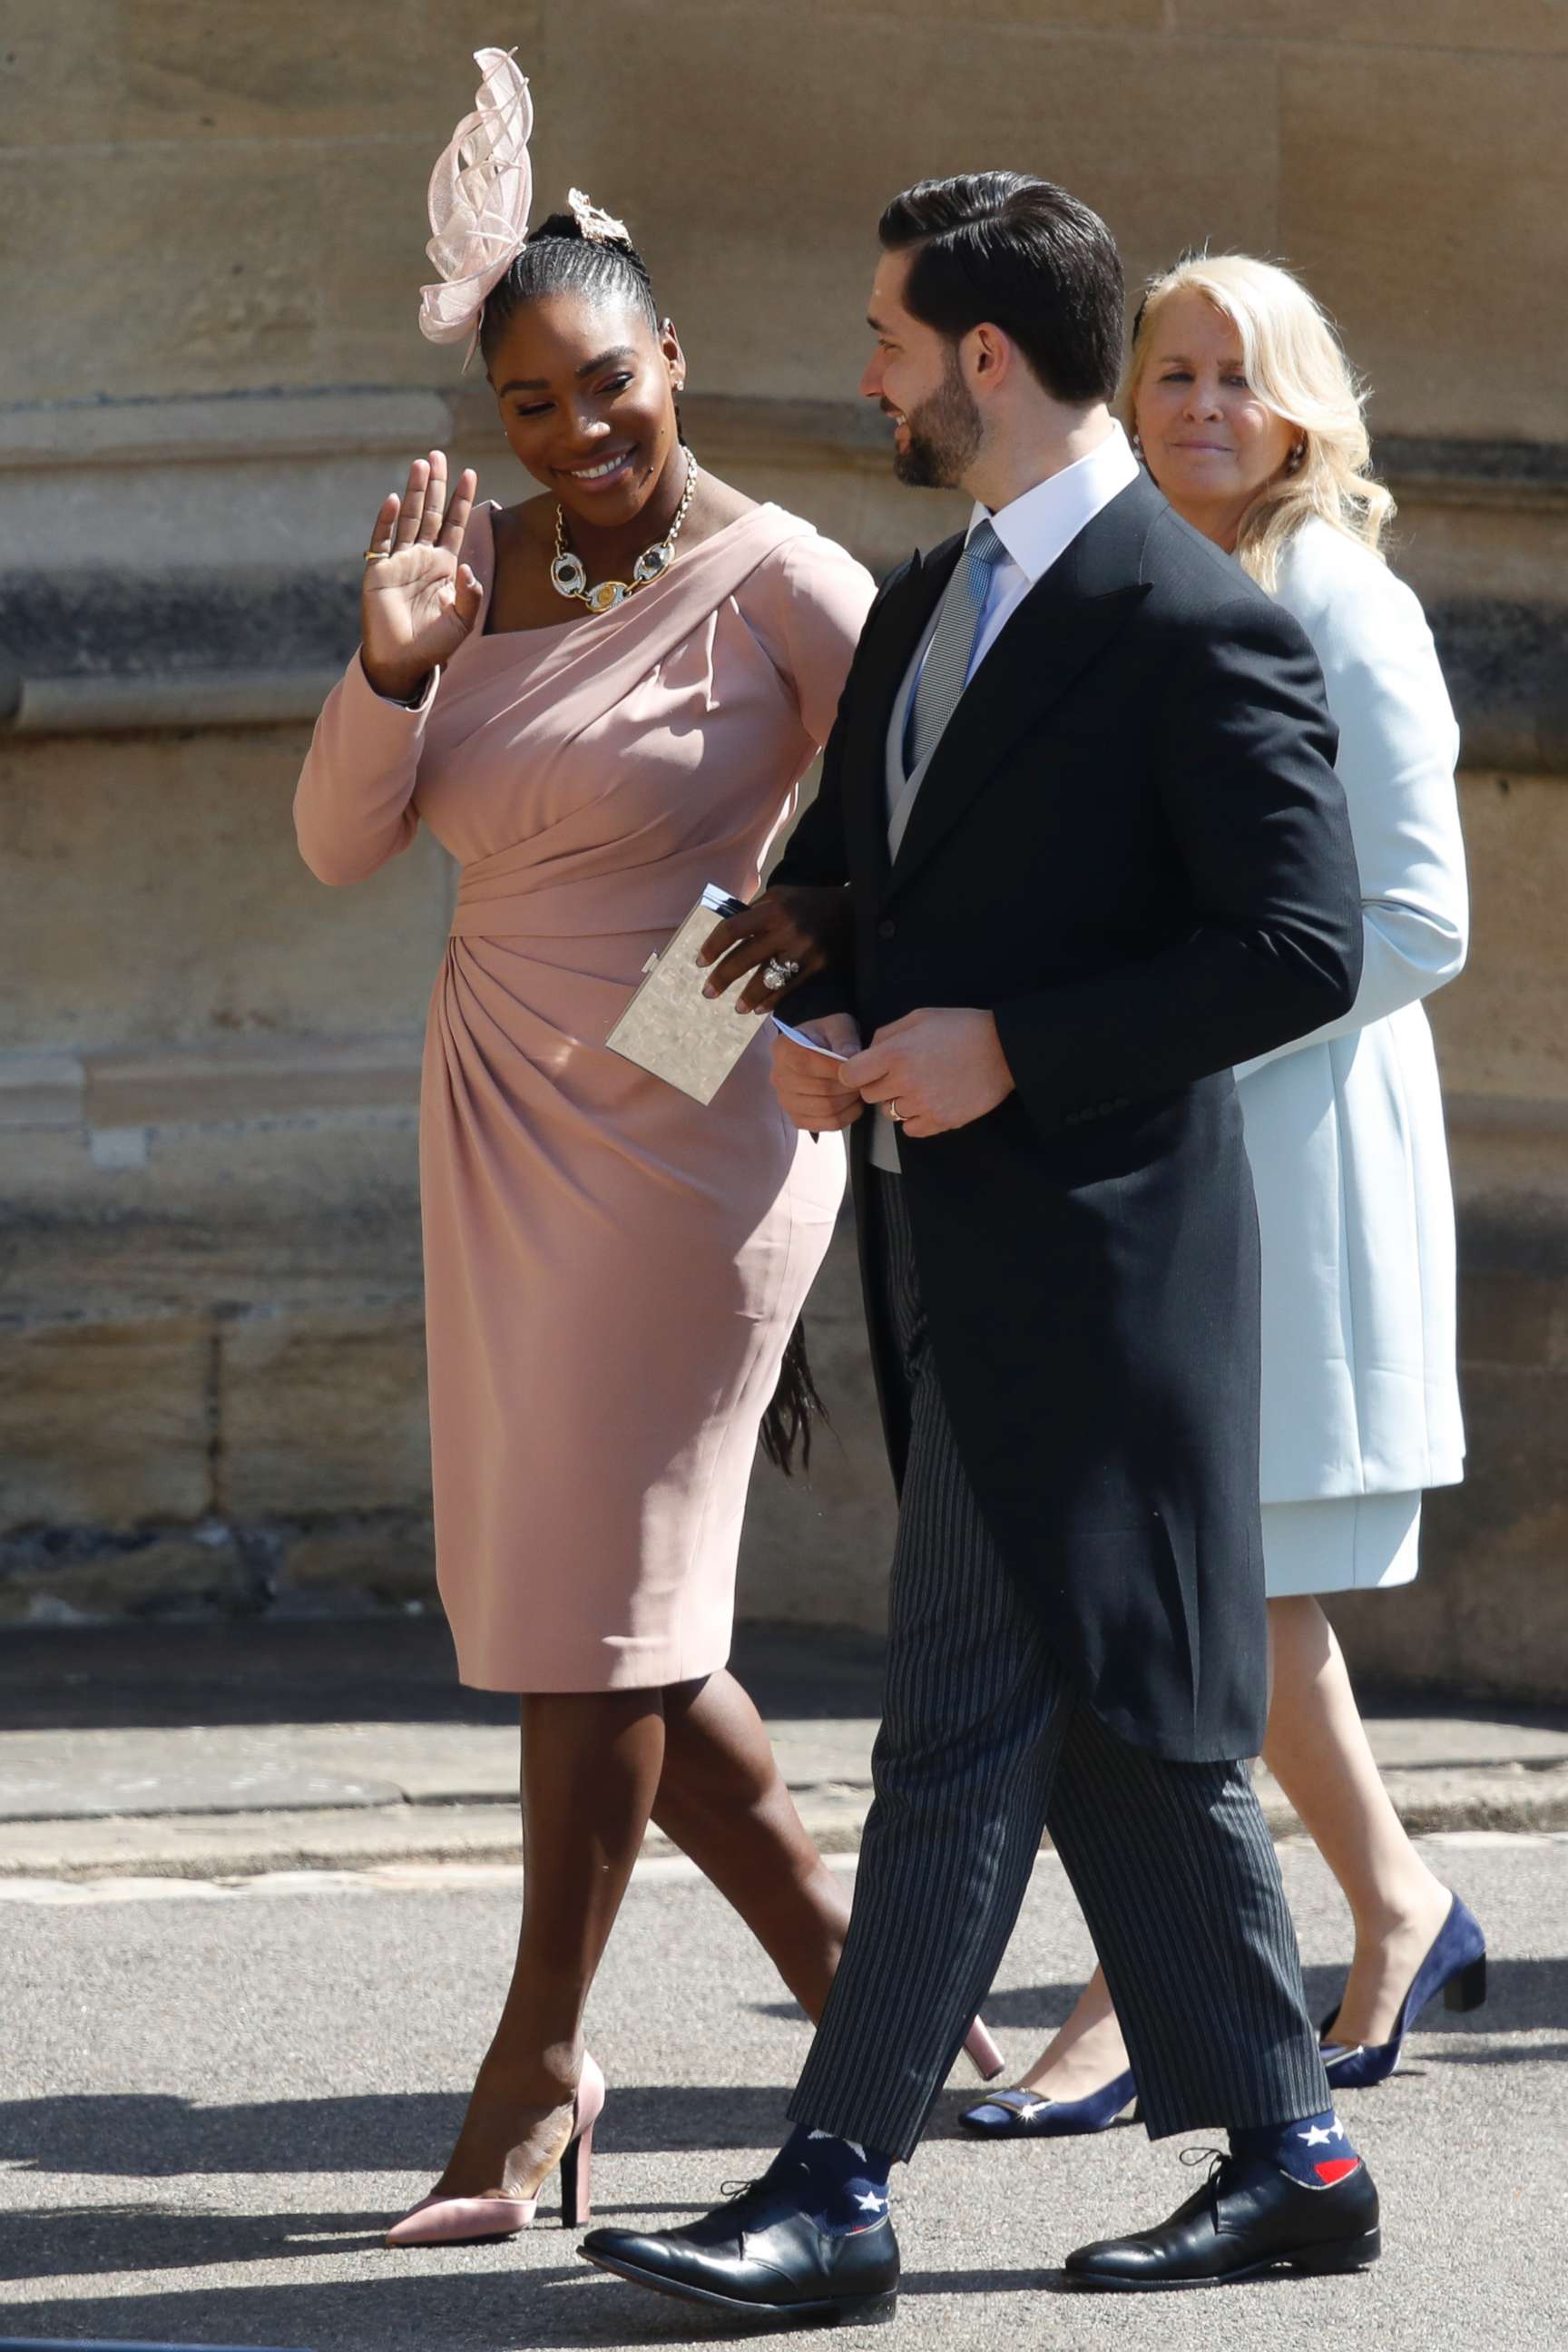 PHOTO: Serena Williams and her husband Alexis Ohanian arrive for the wedding ceremony of Prince Harry and Meghan Markle at St. George's Chapel in Windsor Castle in Windsor, May 19, 2018.